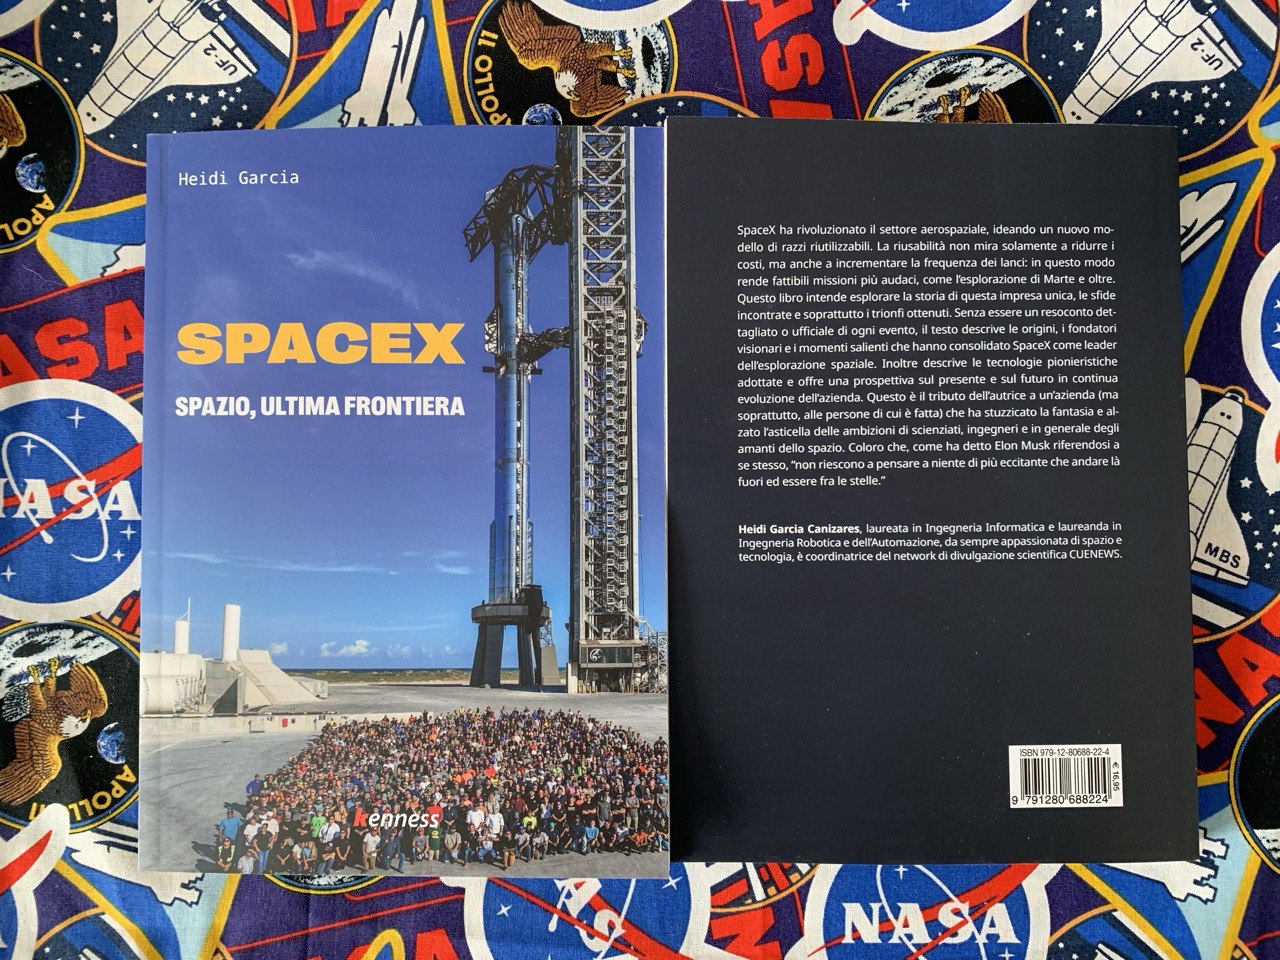 Edited by journalist Valentina Bucello.  Space and Space: Youth of the Future.  With us is Heidi Garcia Canizares, a wonderful young student who loves space.